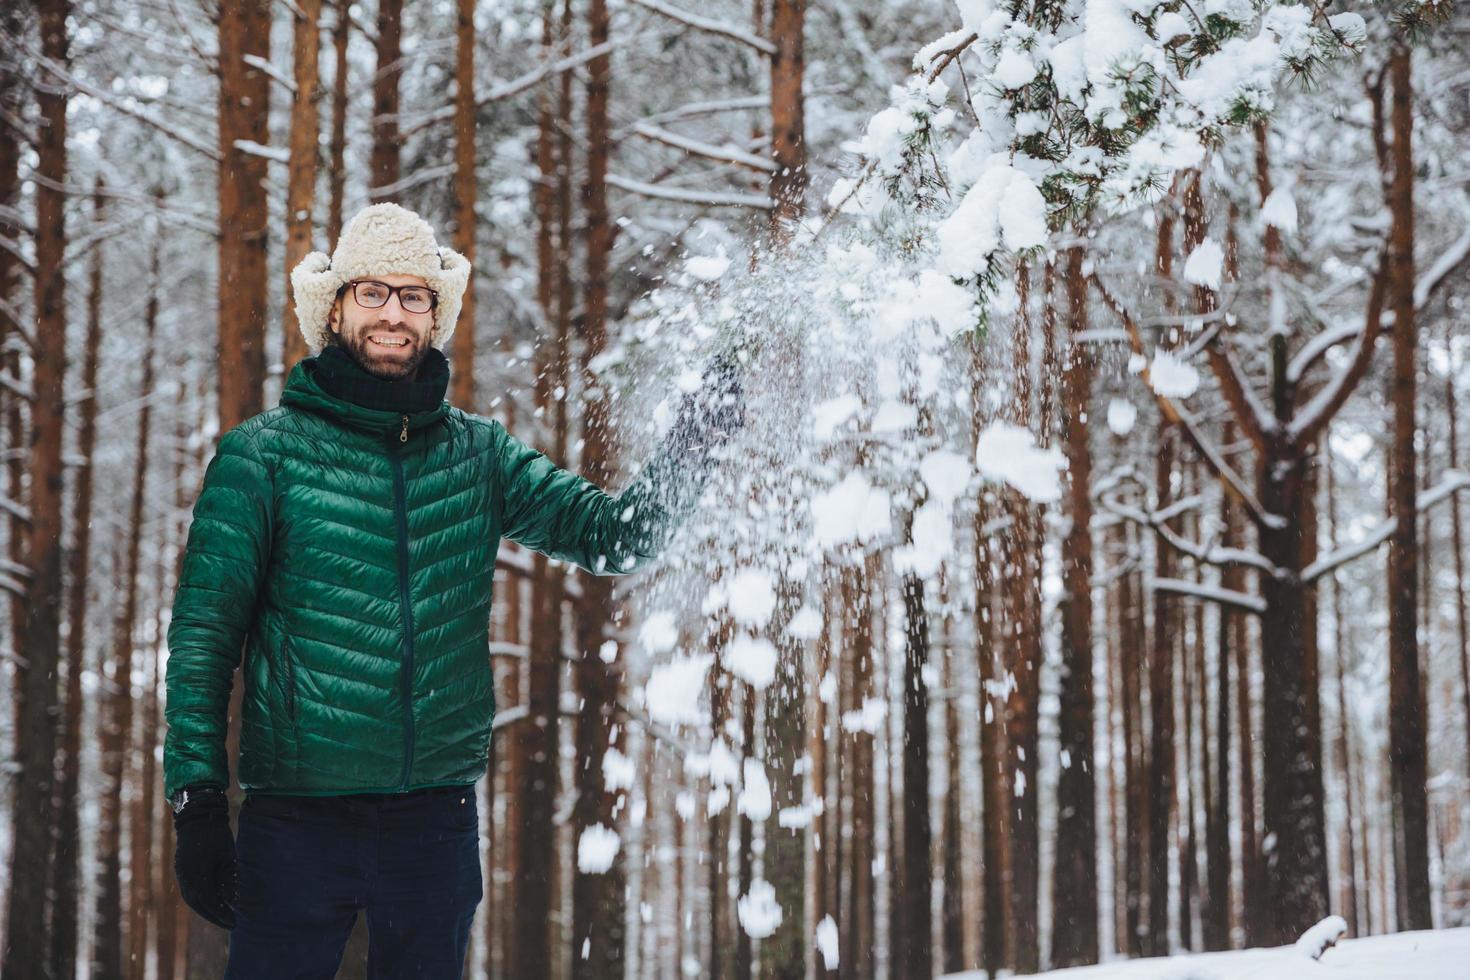 Smiling delightful male dressed in warm clothes, stands in winter forest, throws snow in air, has fun alone, has good mood, expresses positive emotions and feelings. Positiveness concept photo